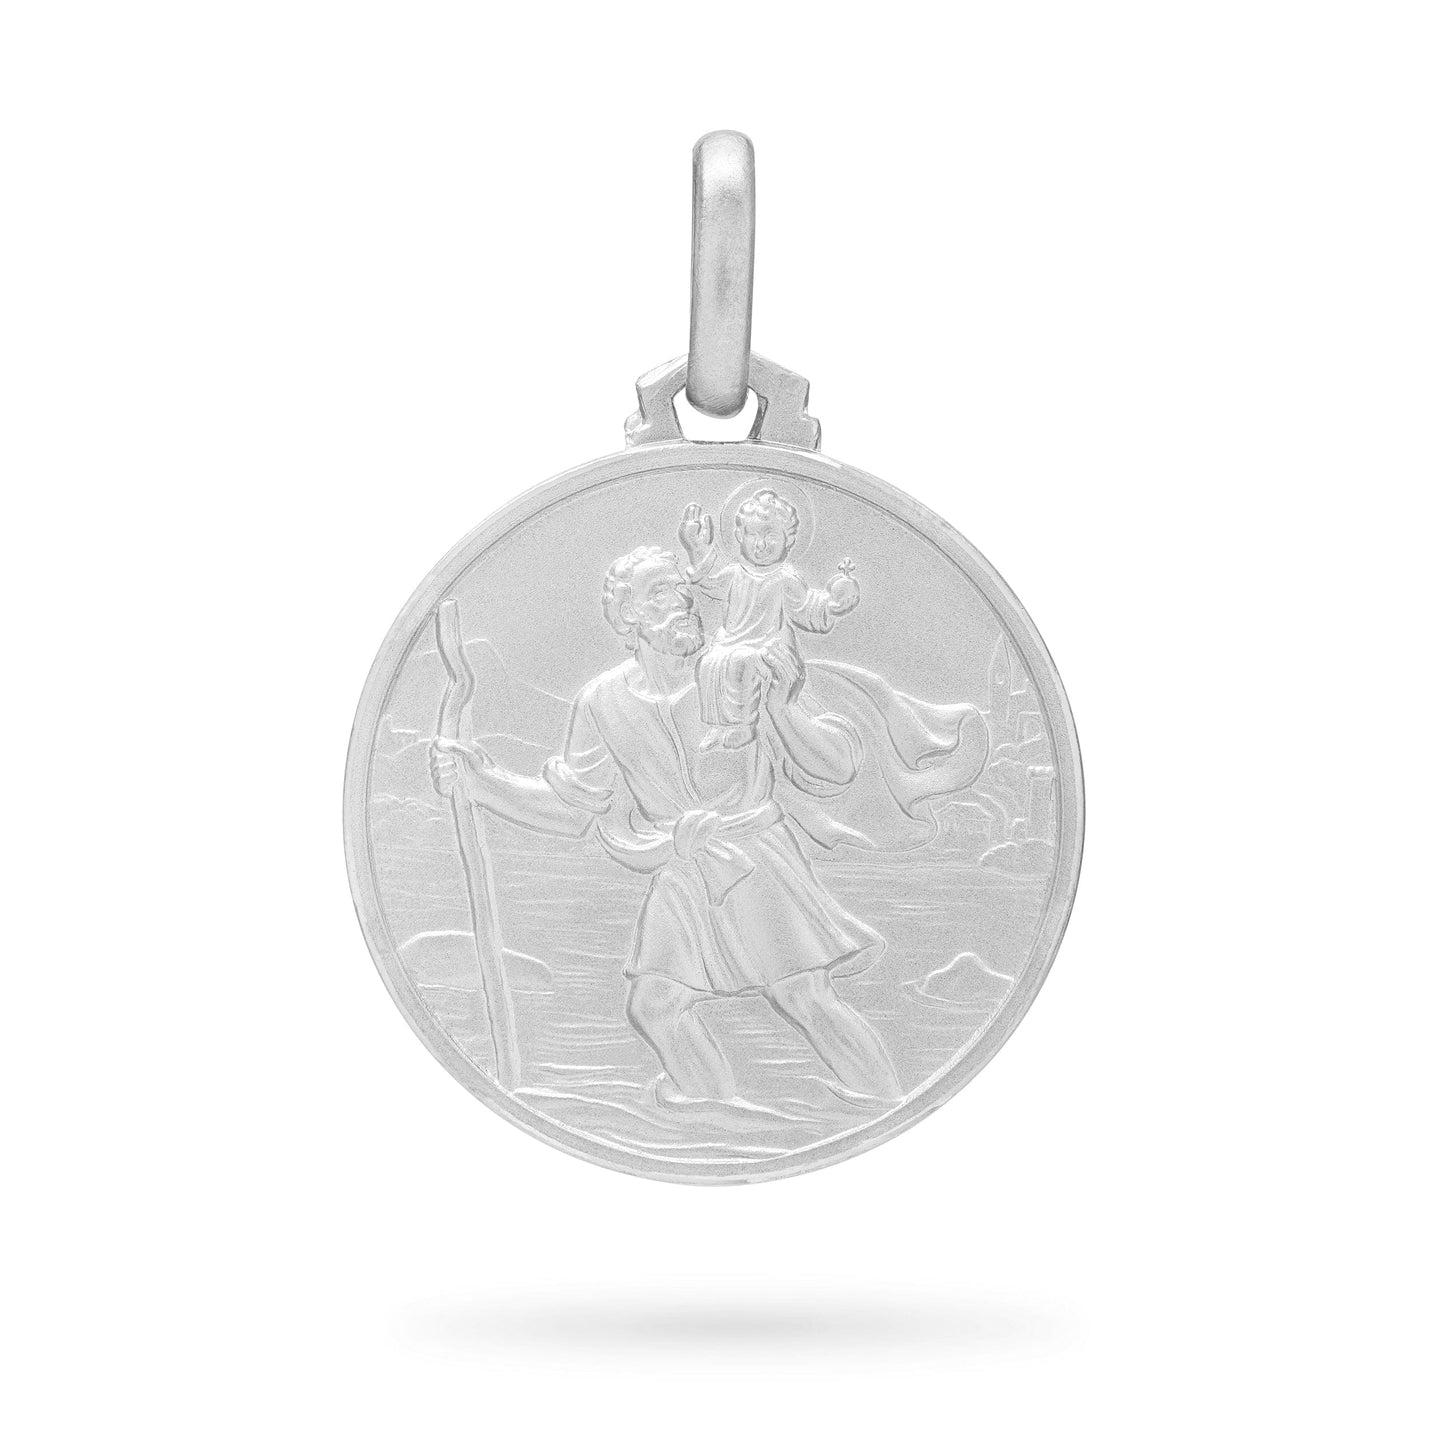 MONDO CATTOLICO Medal Sterling silver medal of Saint Christopher